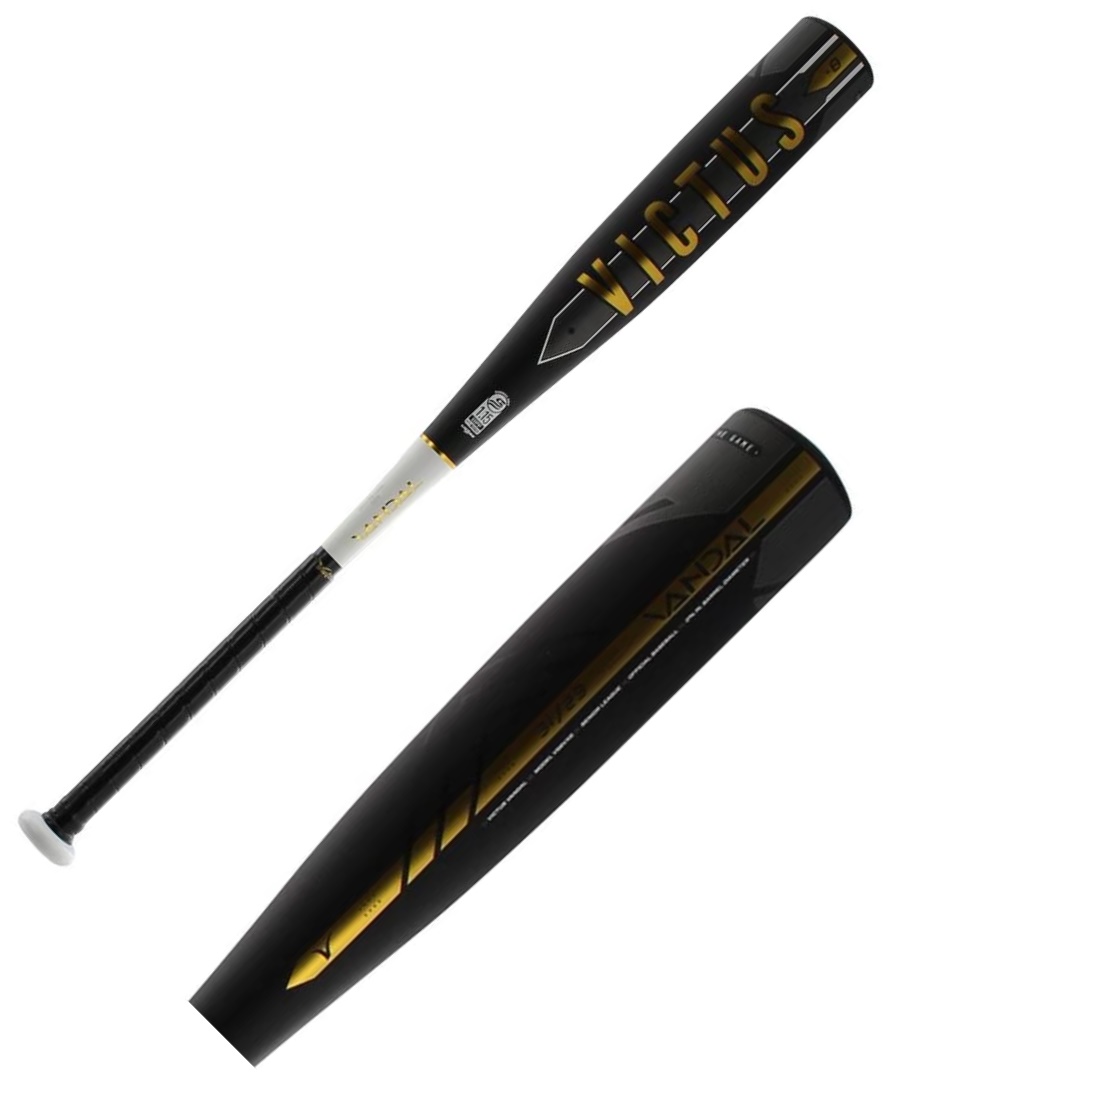 victus-vandal-10-usssa-baseball-bat-30-inch-20-oz VSBVX10-3020 Victus  As a company founded majority-owned and operated by current and former